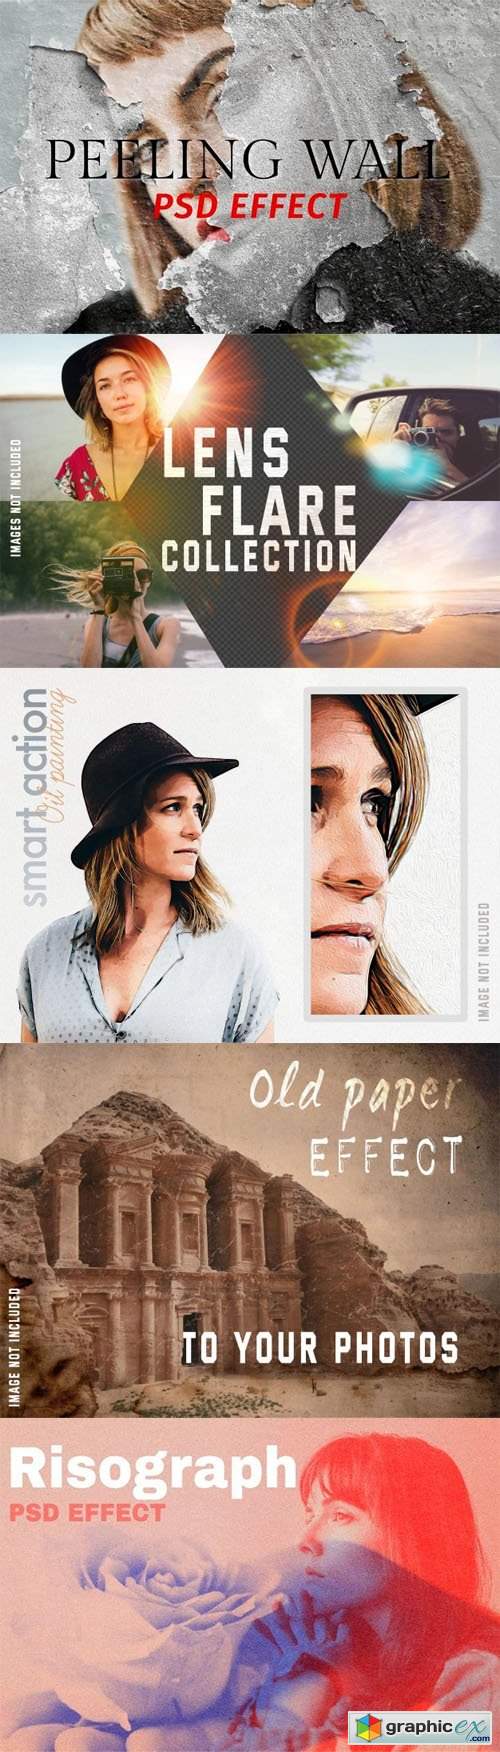  10+ Awesome Photoshop Effects & Overlays Collection 